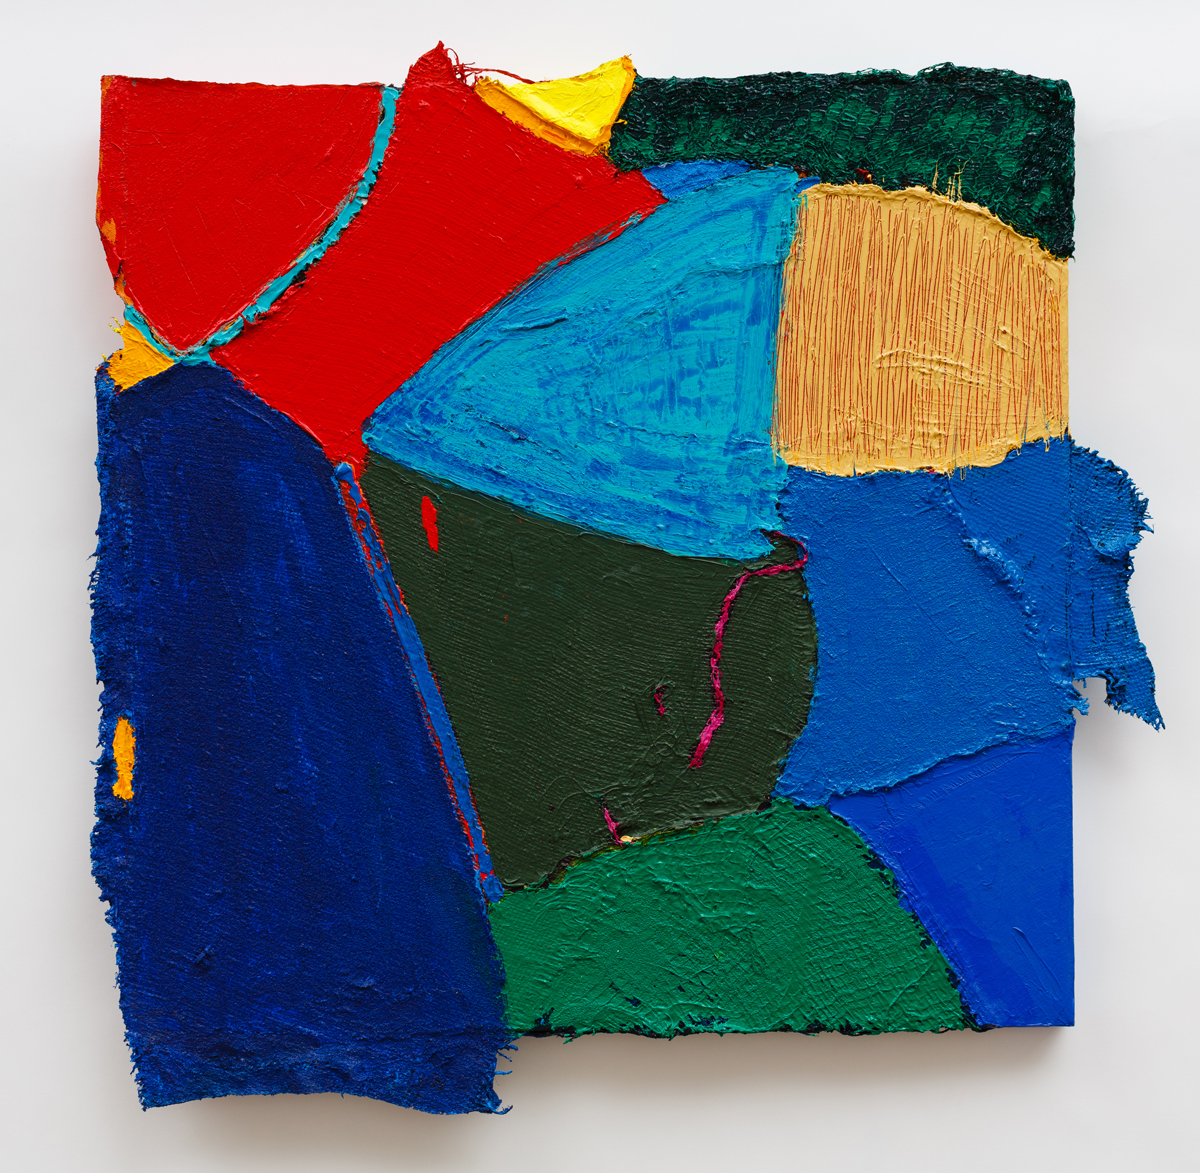 Mirror Man (2011), Acrylic and Pumice on Hessian Scrim, Sacking, Cloth, Vegetable Netting and Canvas, 30 x 30 inches